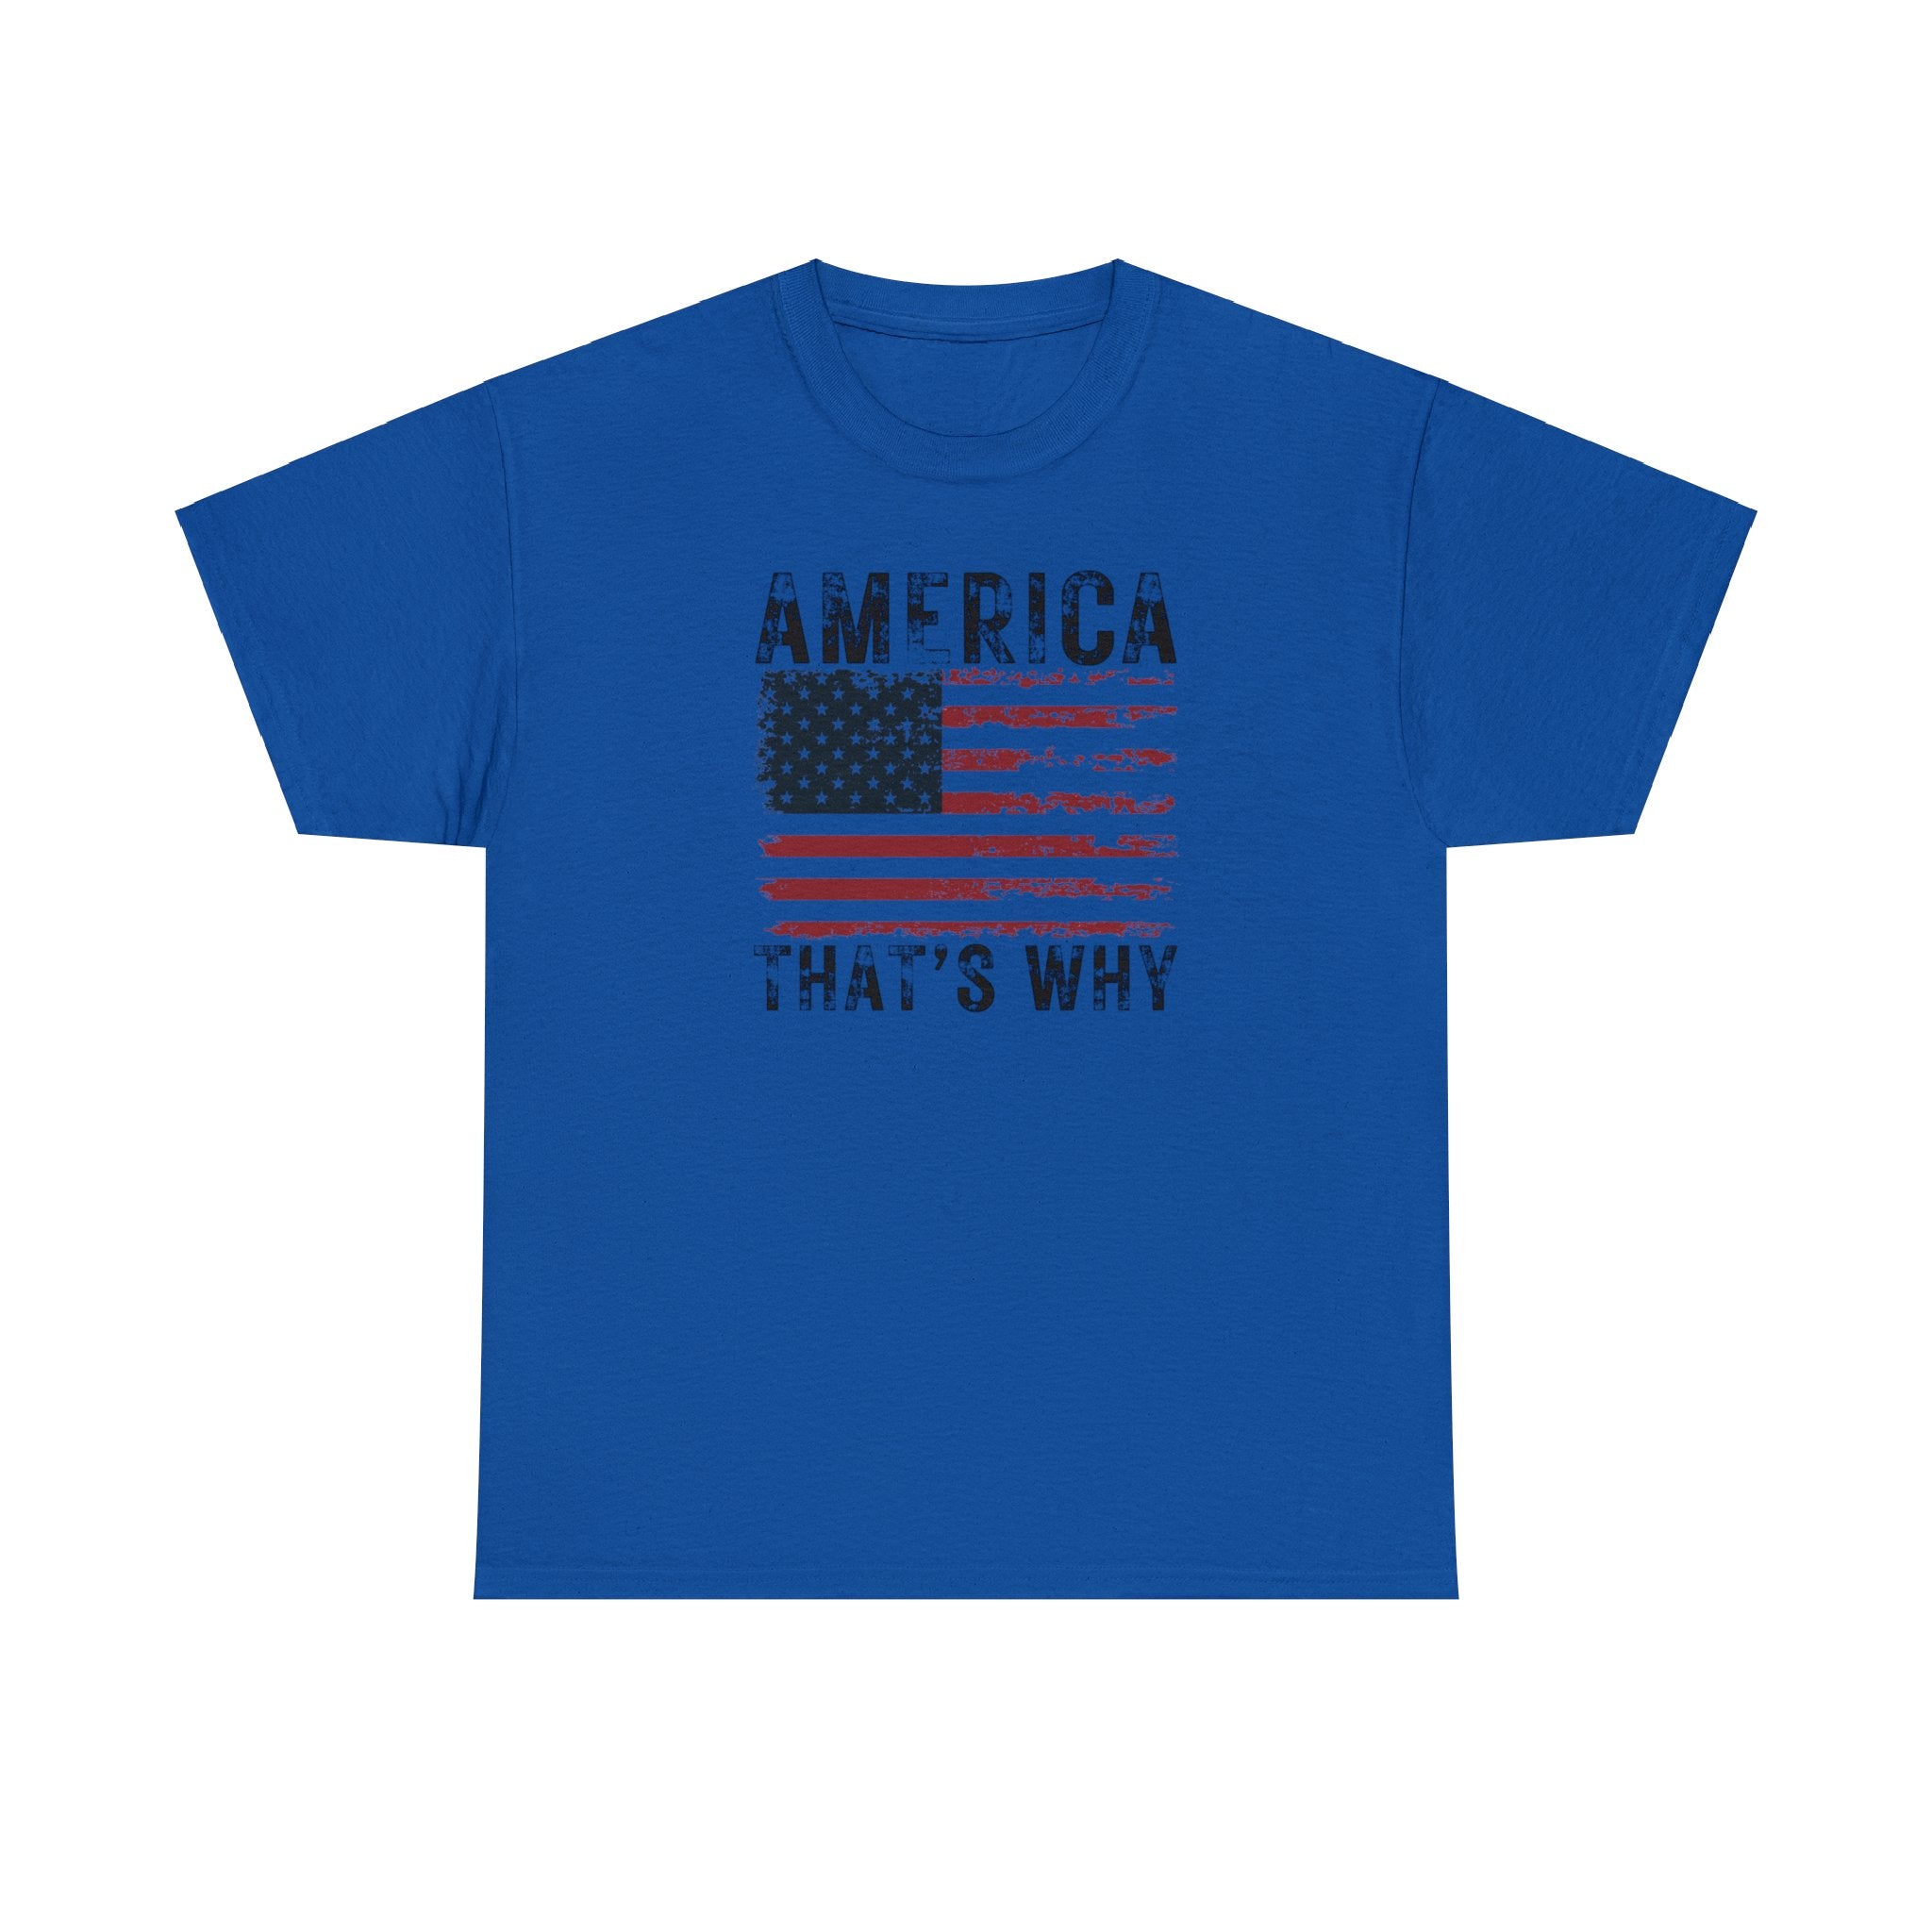 America That's Why T-Shirt